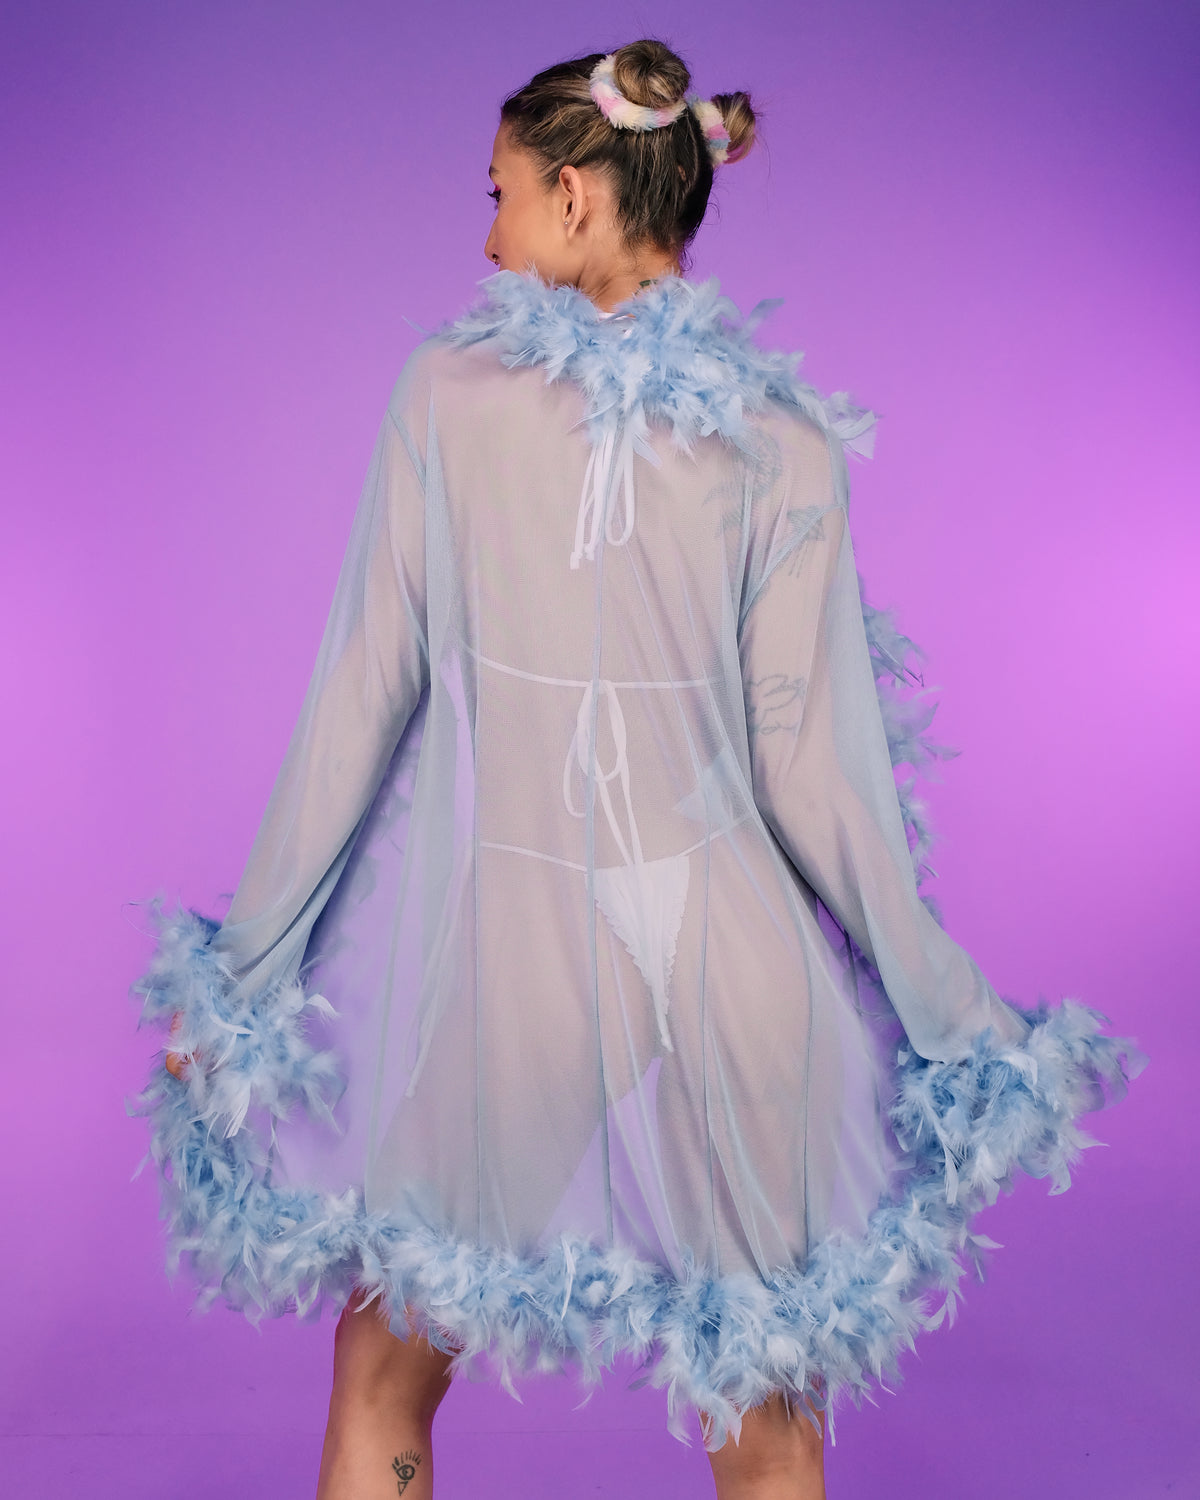 Lady Love Sheer Short Robe With Boa Feather Trim - Rave Wonderland